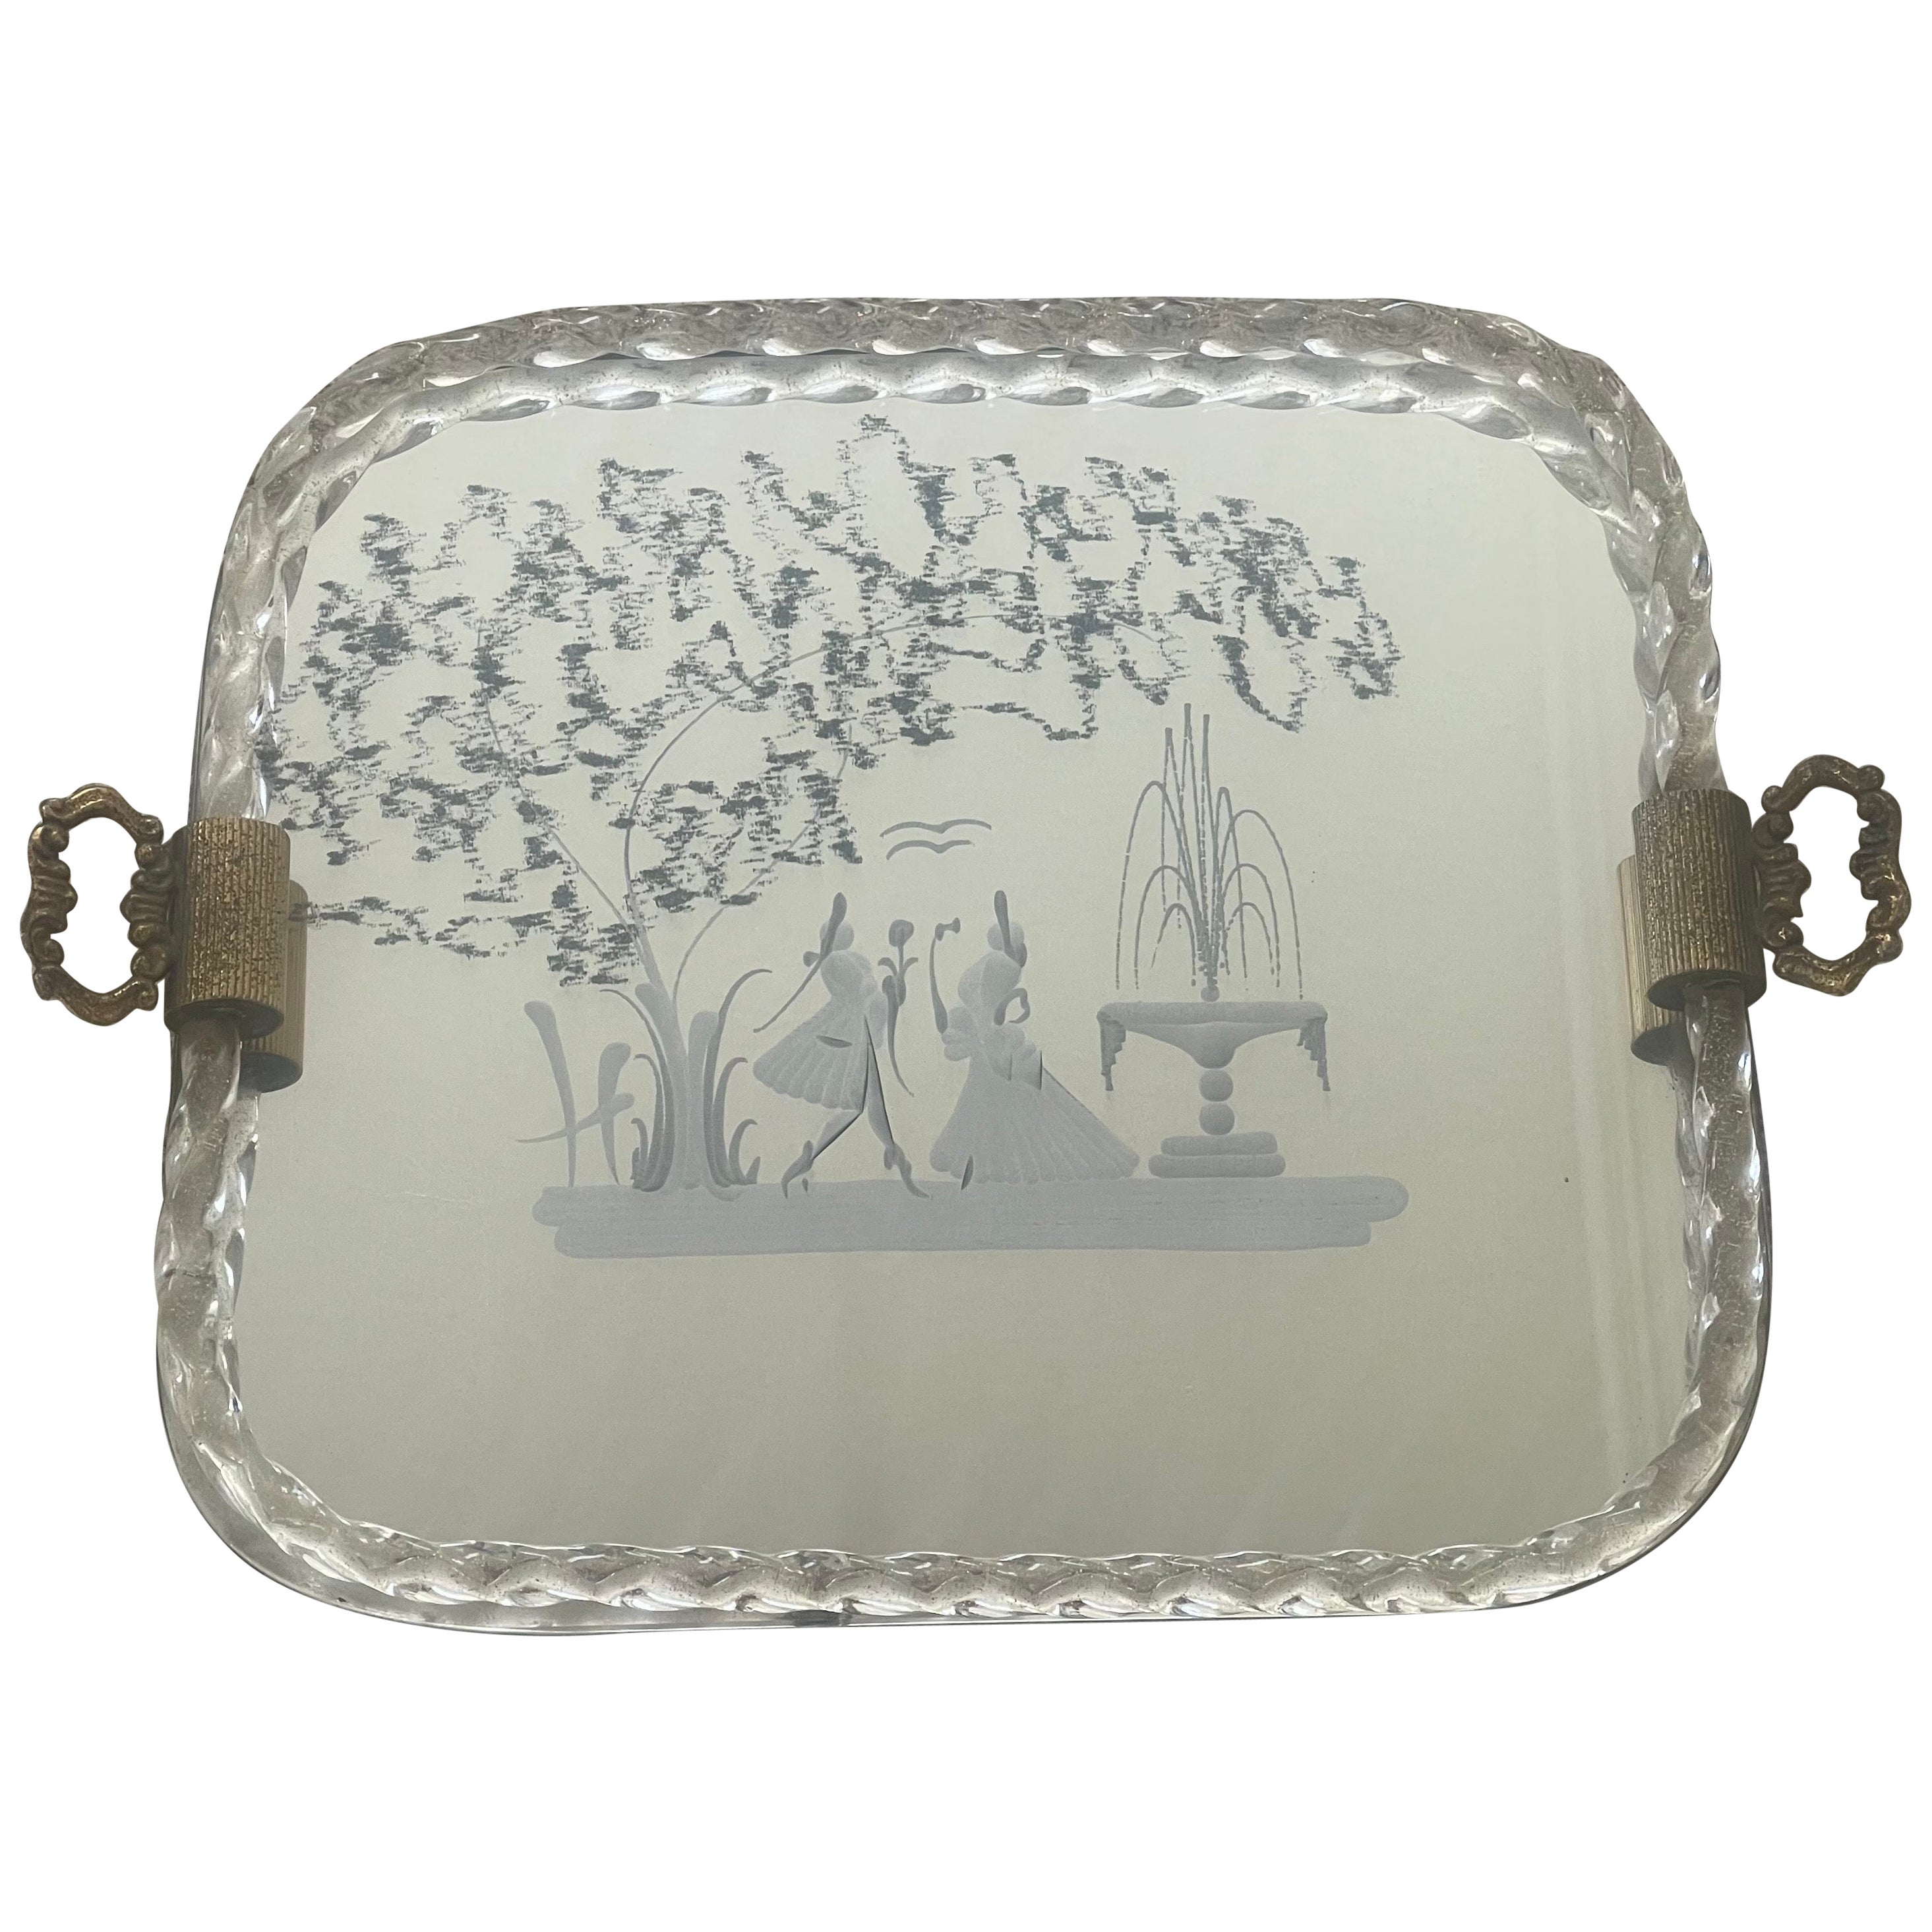 Mirrored Engraved Glass Serving Tray by Ercole Barovier for Murano Glass For Sale